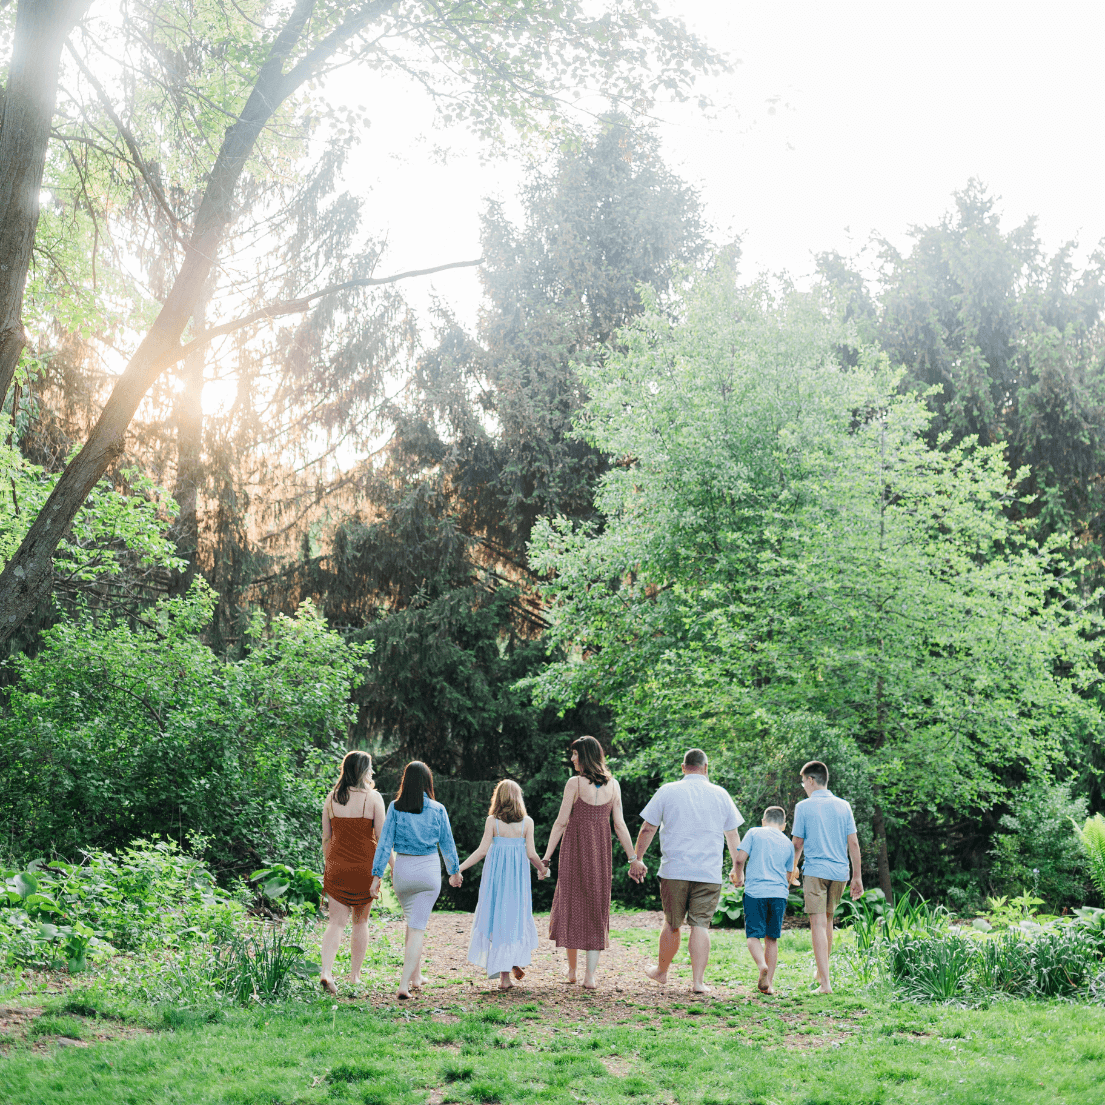 FAMILY OF 7 WALKING IN THE WOODS